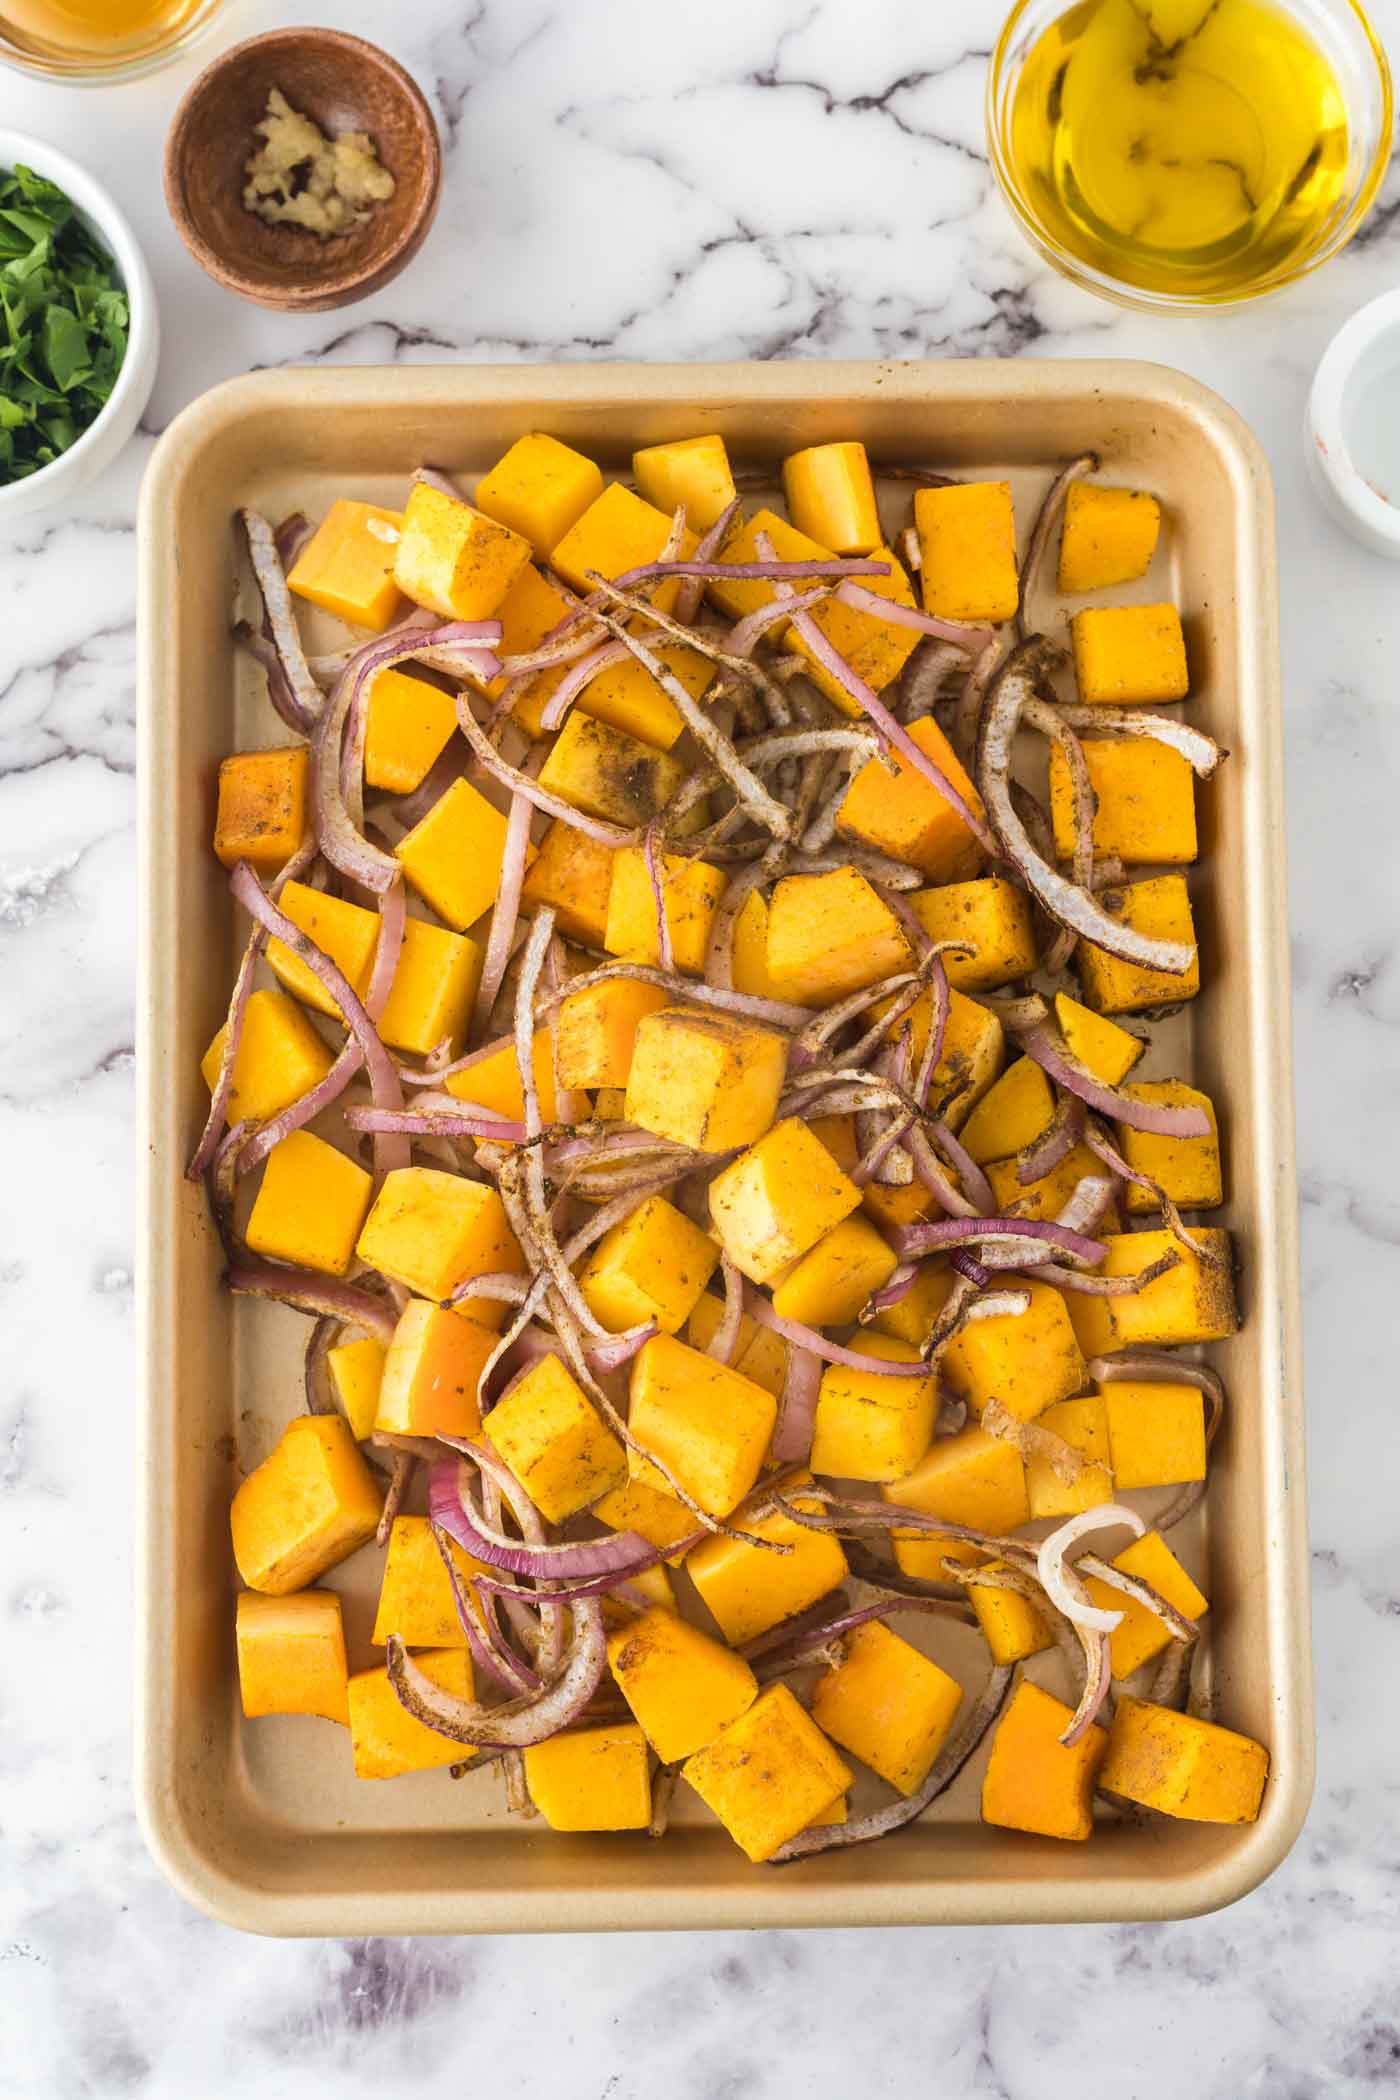 Roasted cubes of squash and red onion on a baking tray.